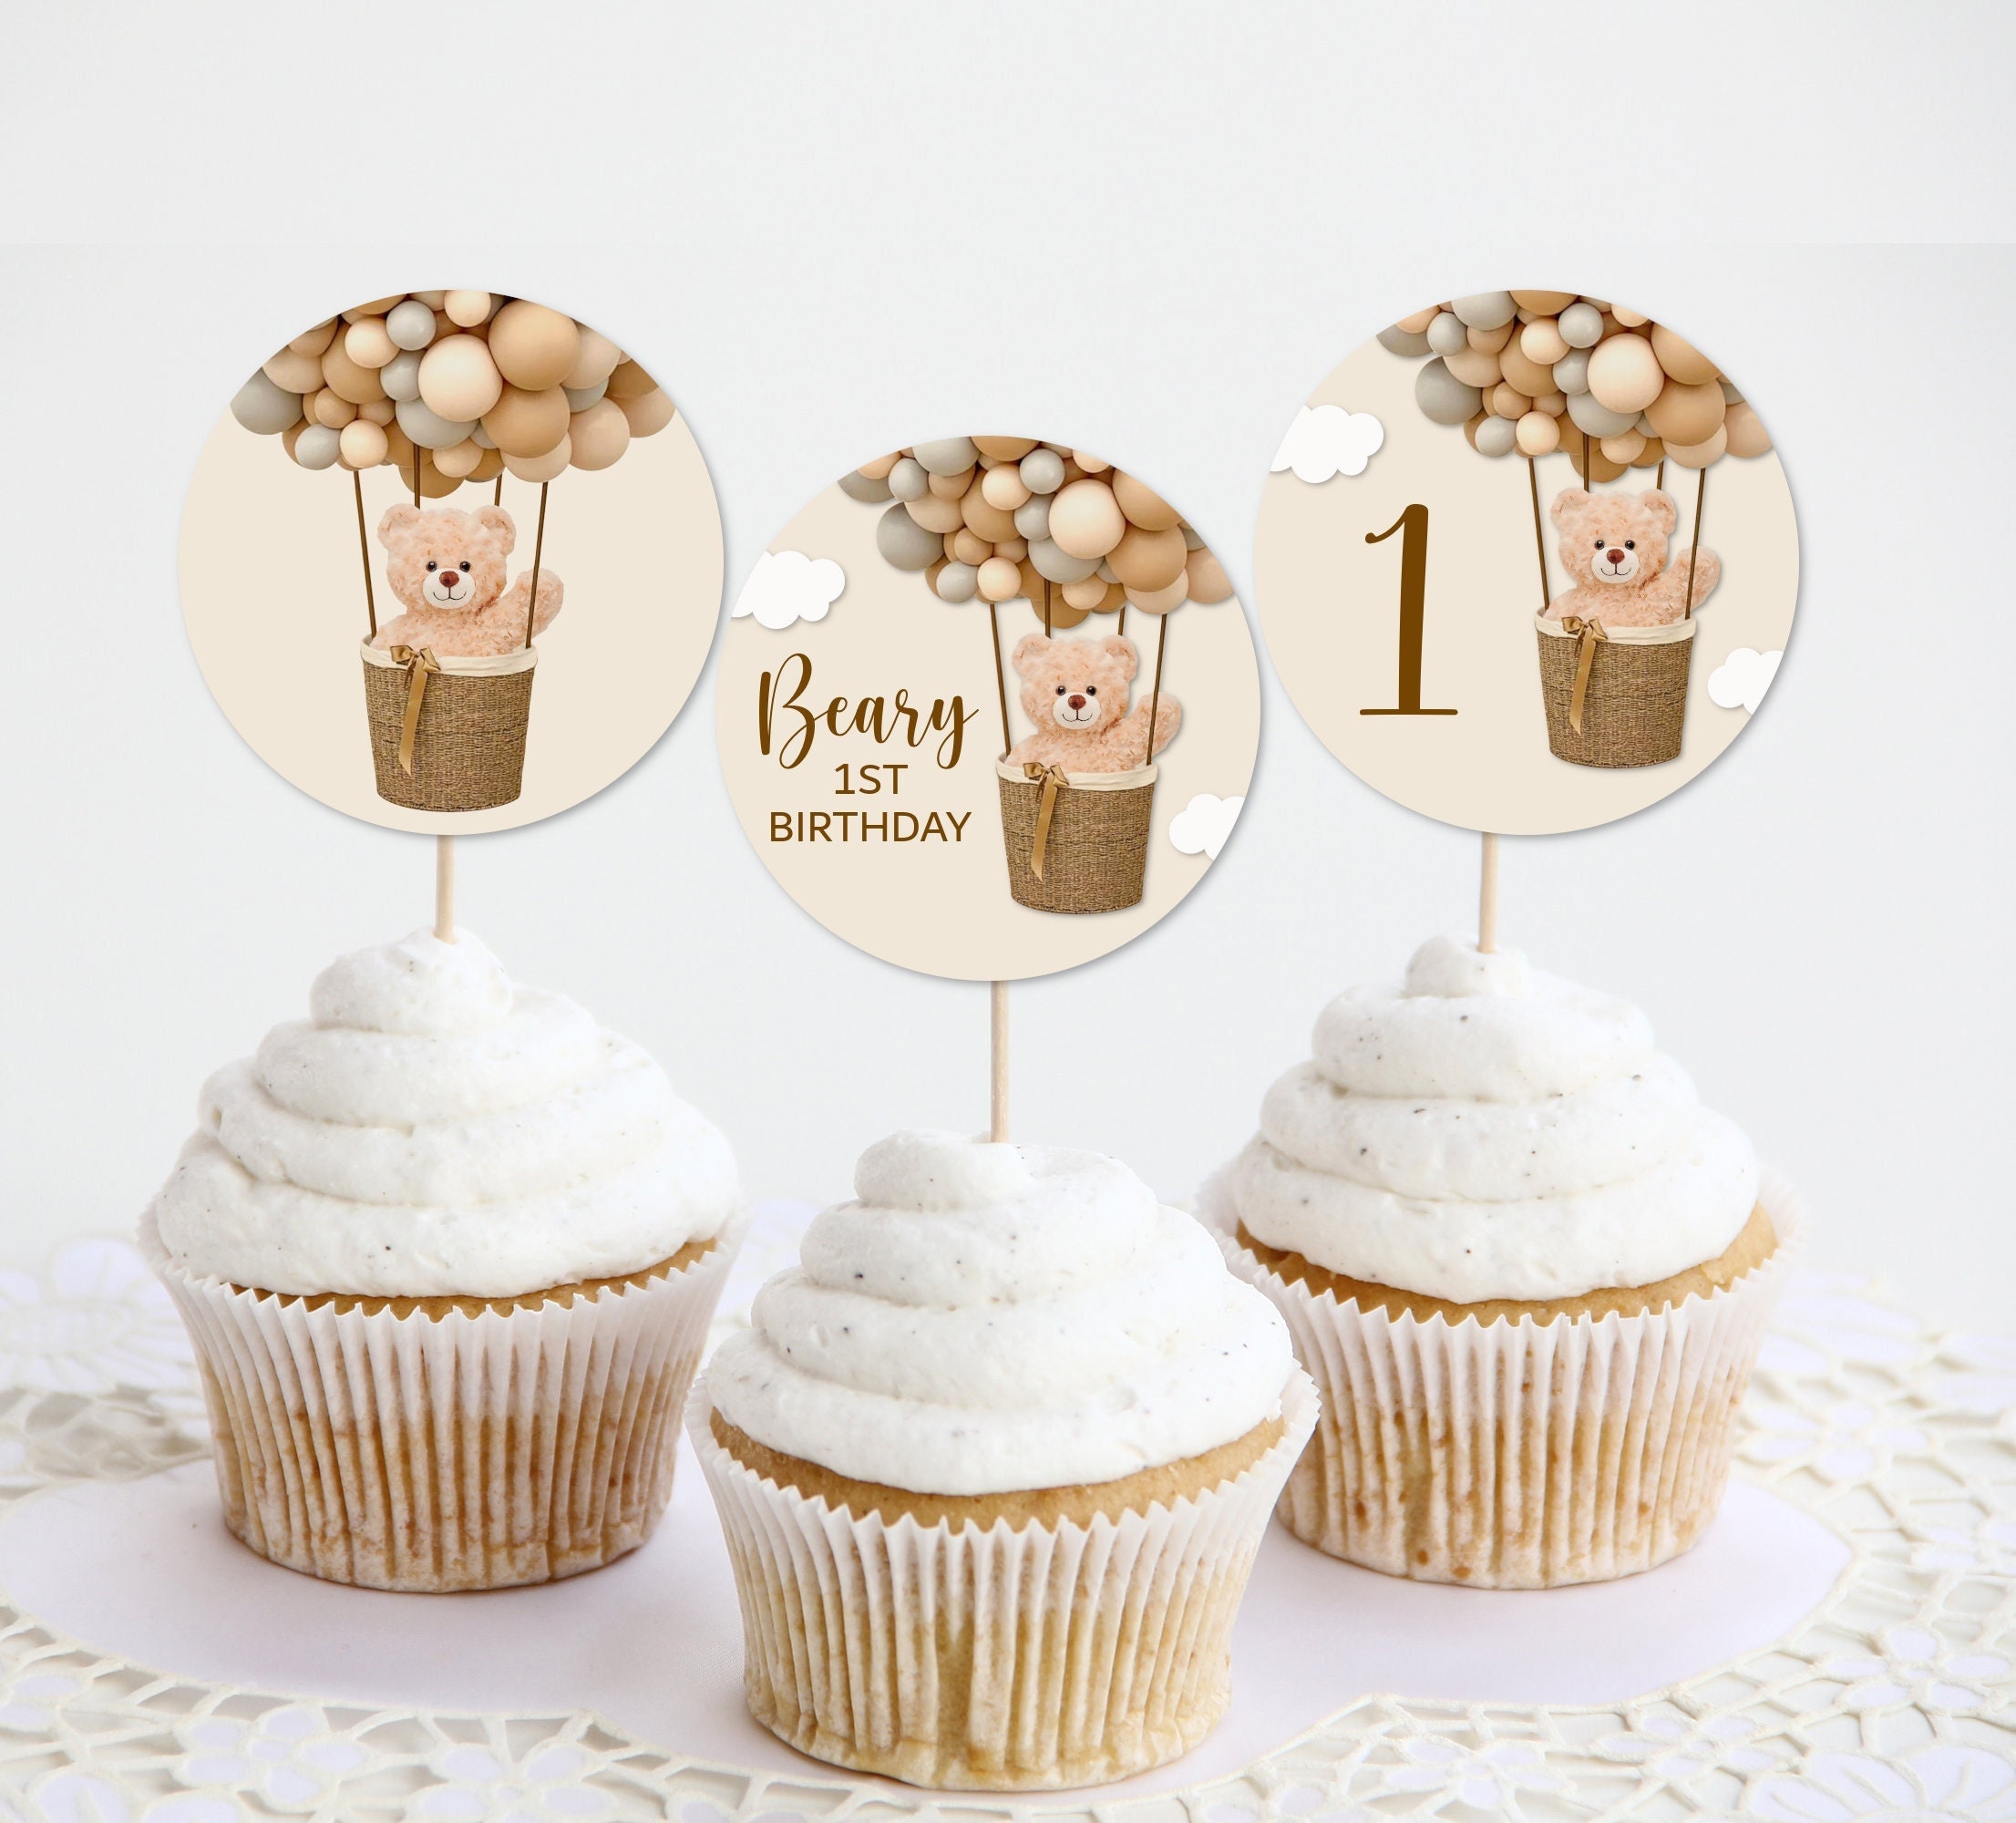 Louis Style Inspired Logo Cupcake Toppers **DIGITAL ORDER ONLY** Color  Toppers